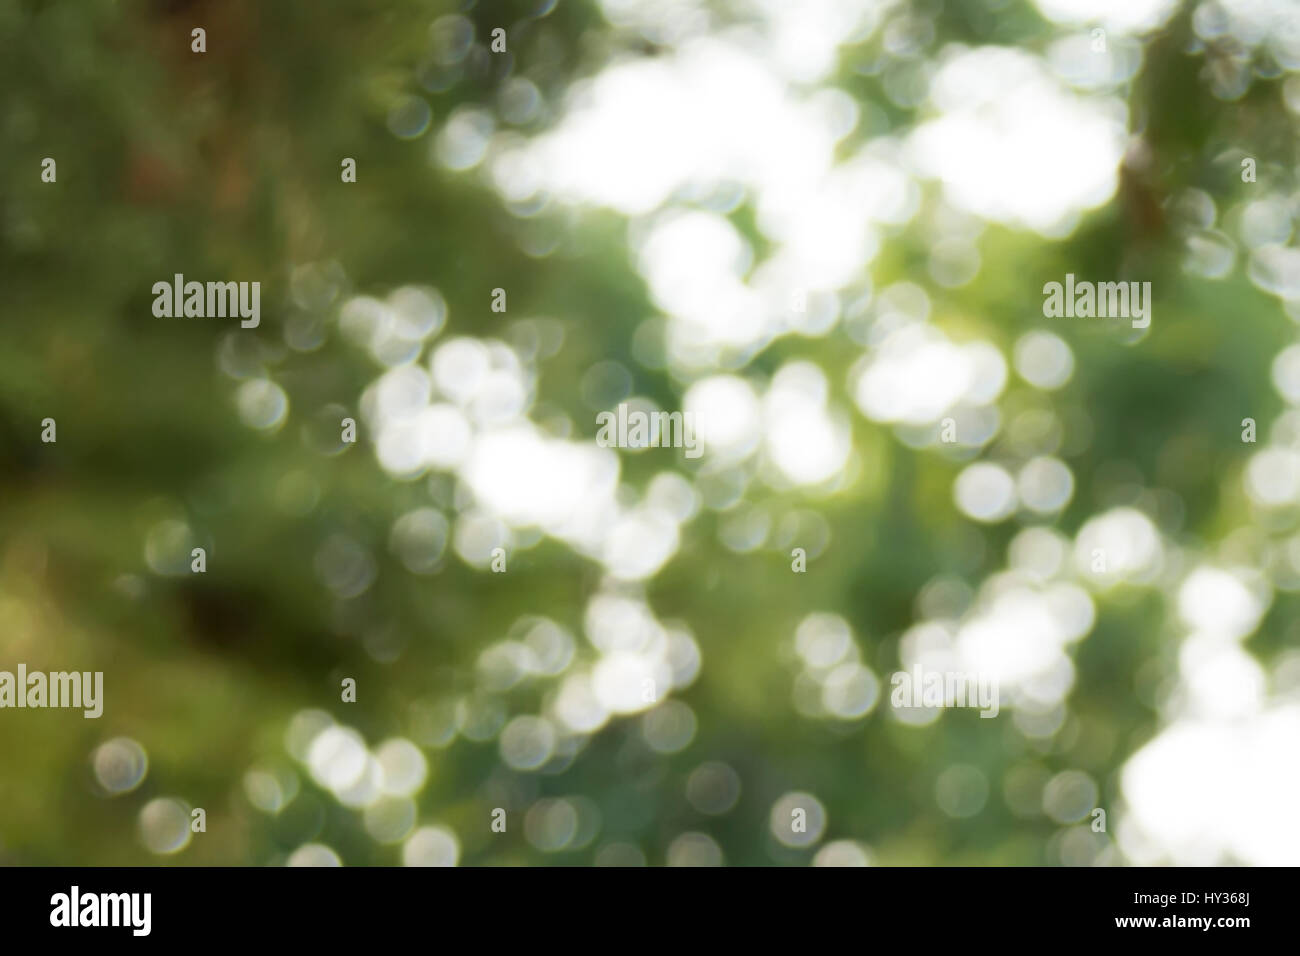 Blurry background with fir-tree branches with patches of light from sunshine. Selective focus Stock Photo